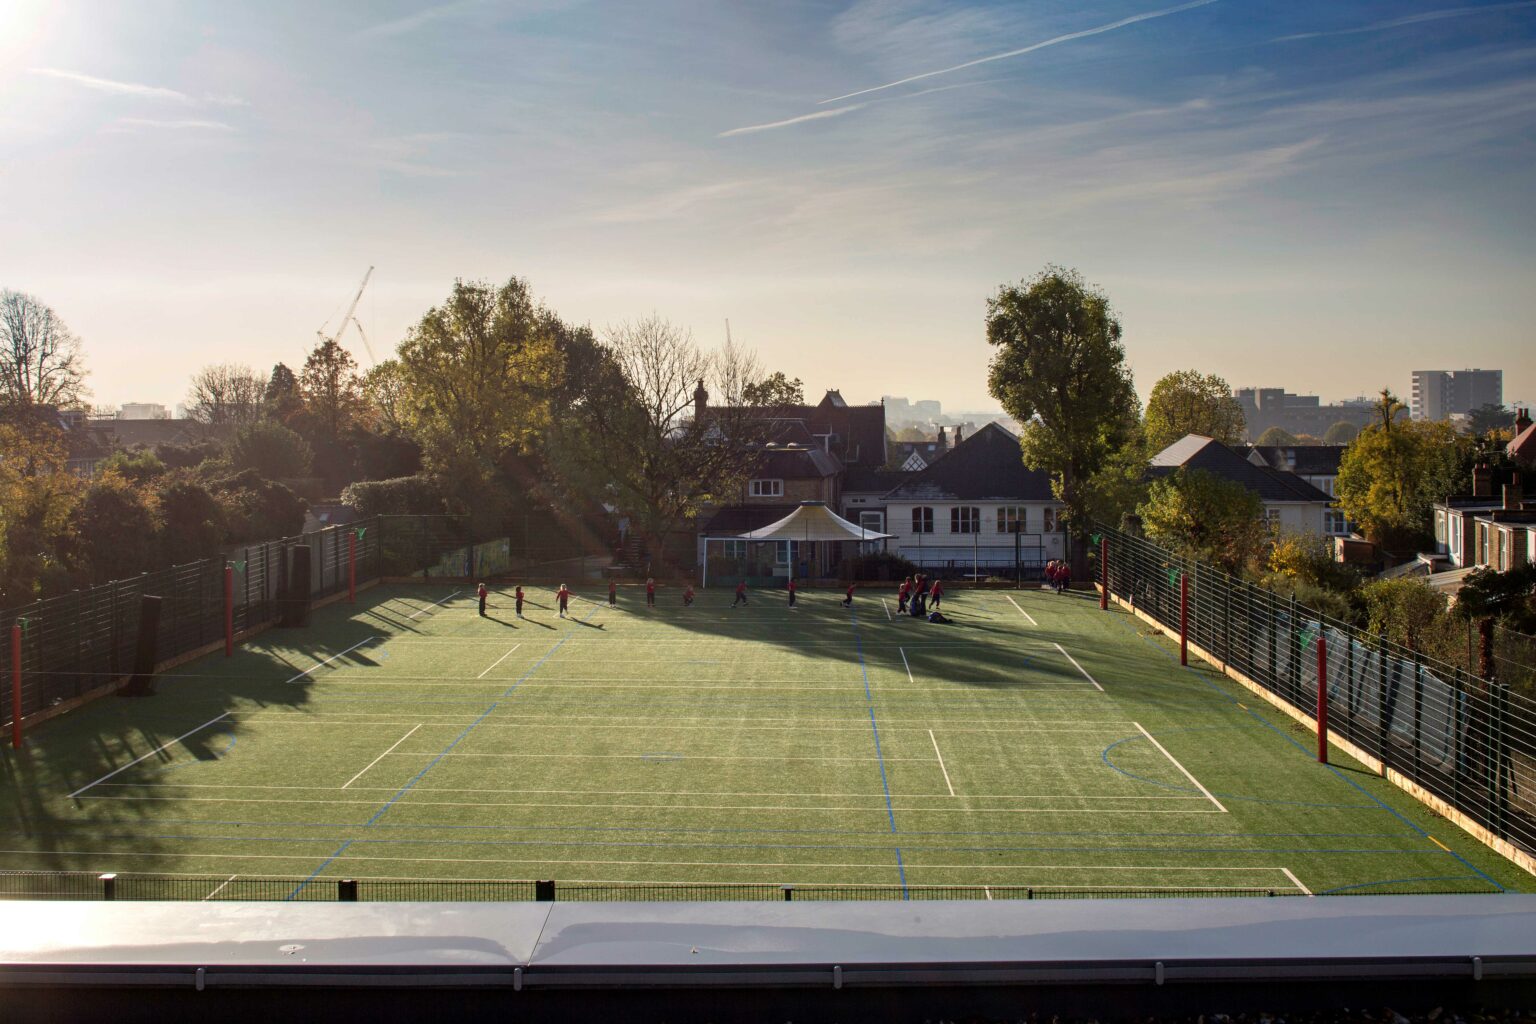 Notting Hill and Ealing High School